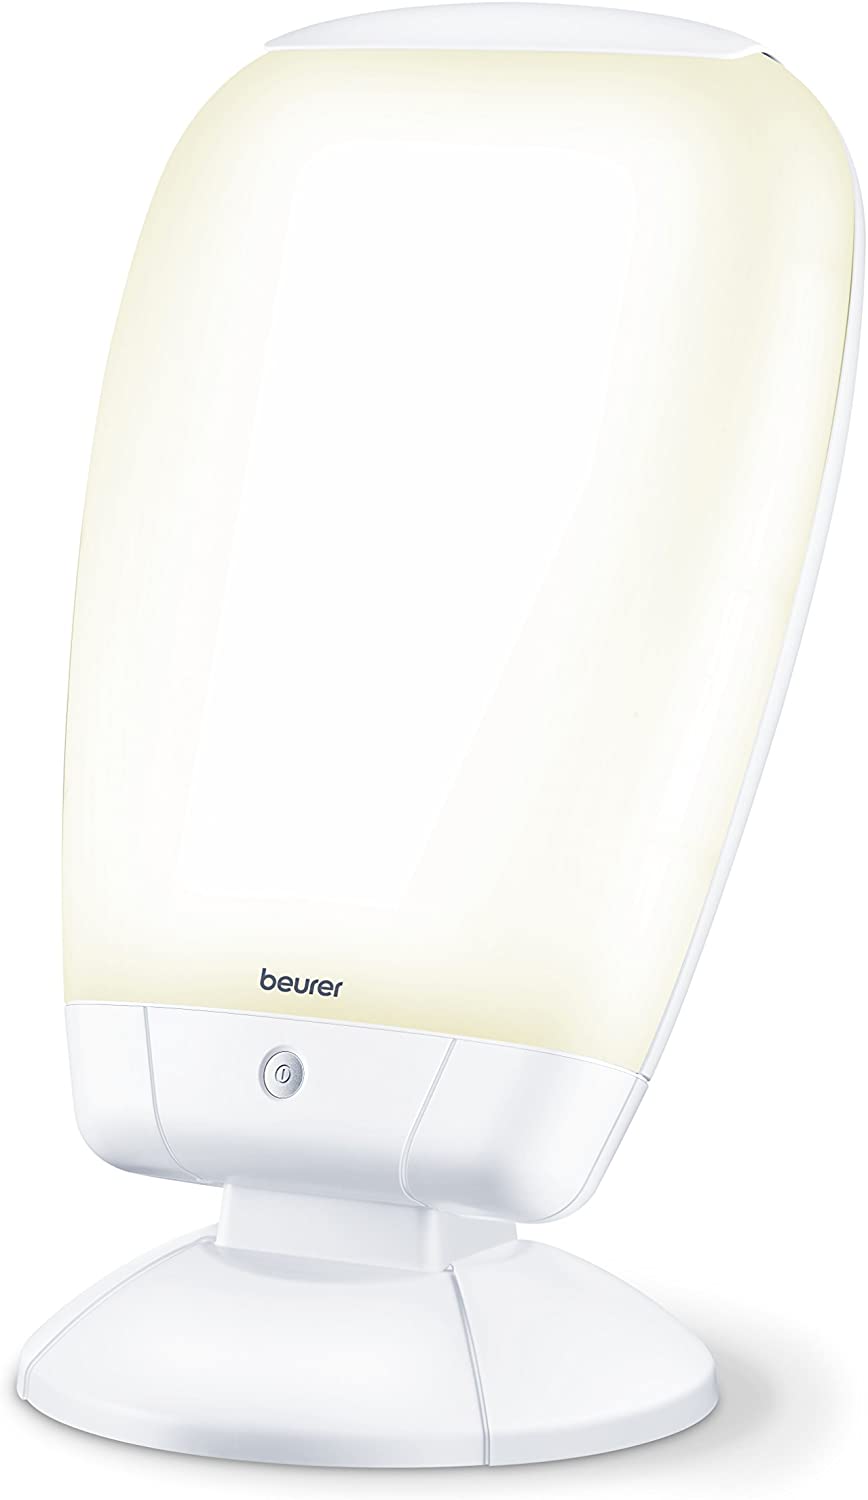 Beurer TL 80 daylight simulation, daylight lamp with continuous tilt adjust